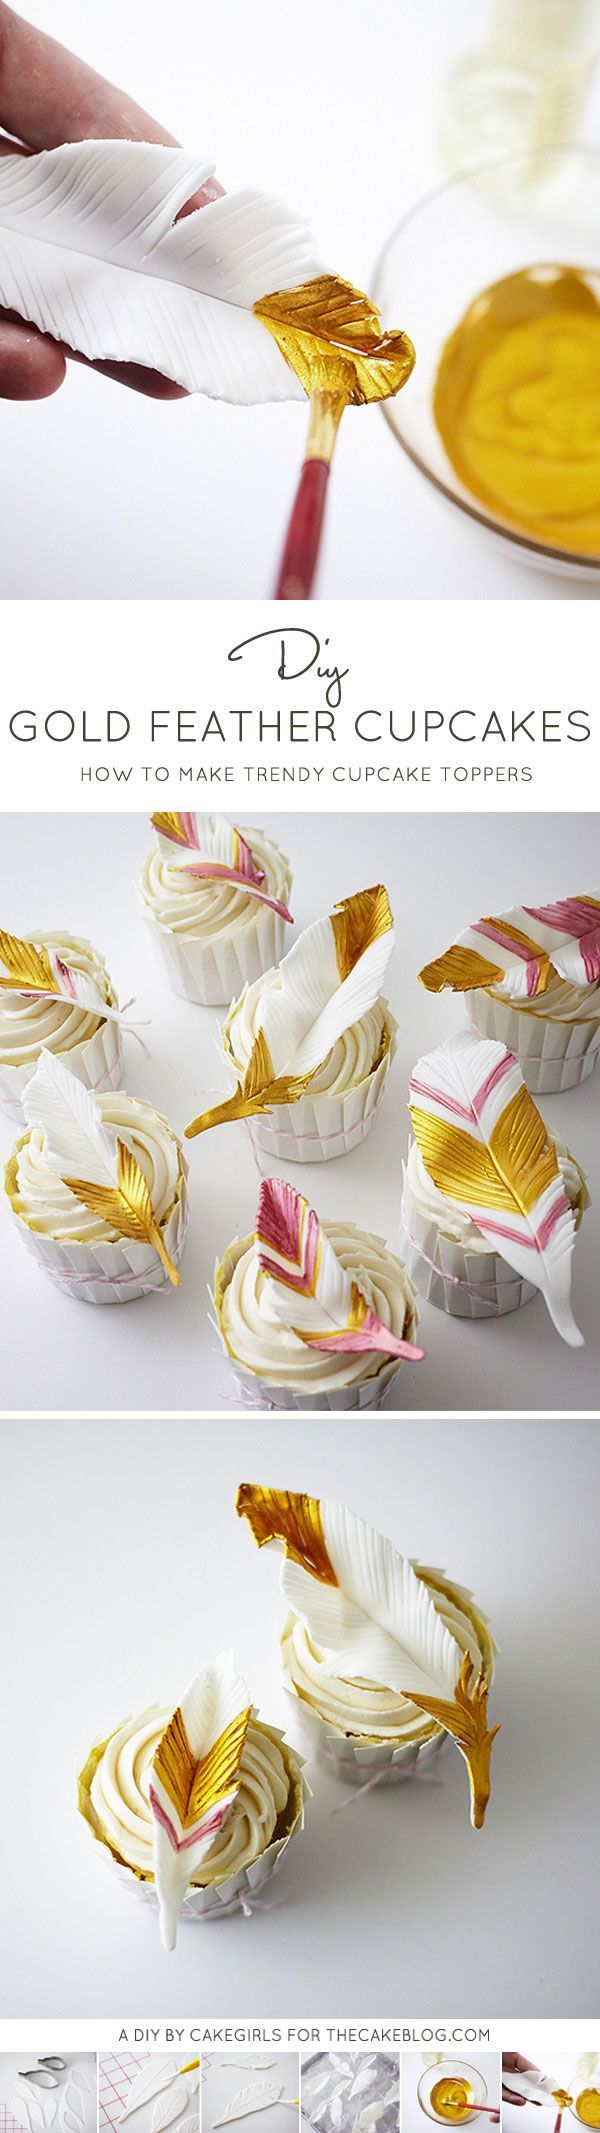 Fancy up your cupcakes with these DIY Gold Feathers | a cake tutorial by Cakegirls for TheCakeBlog.com